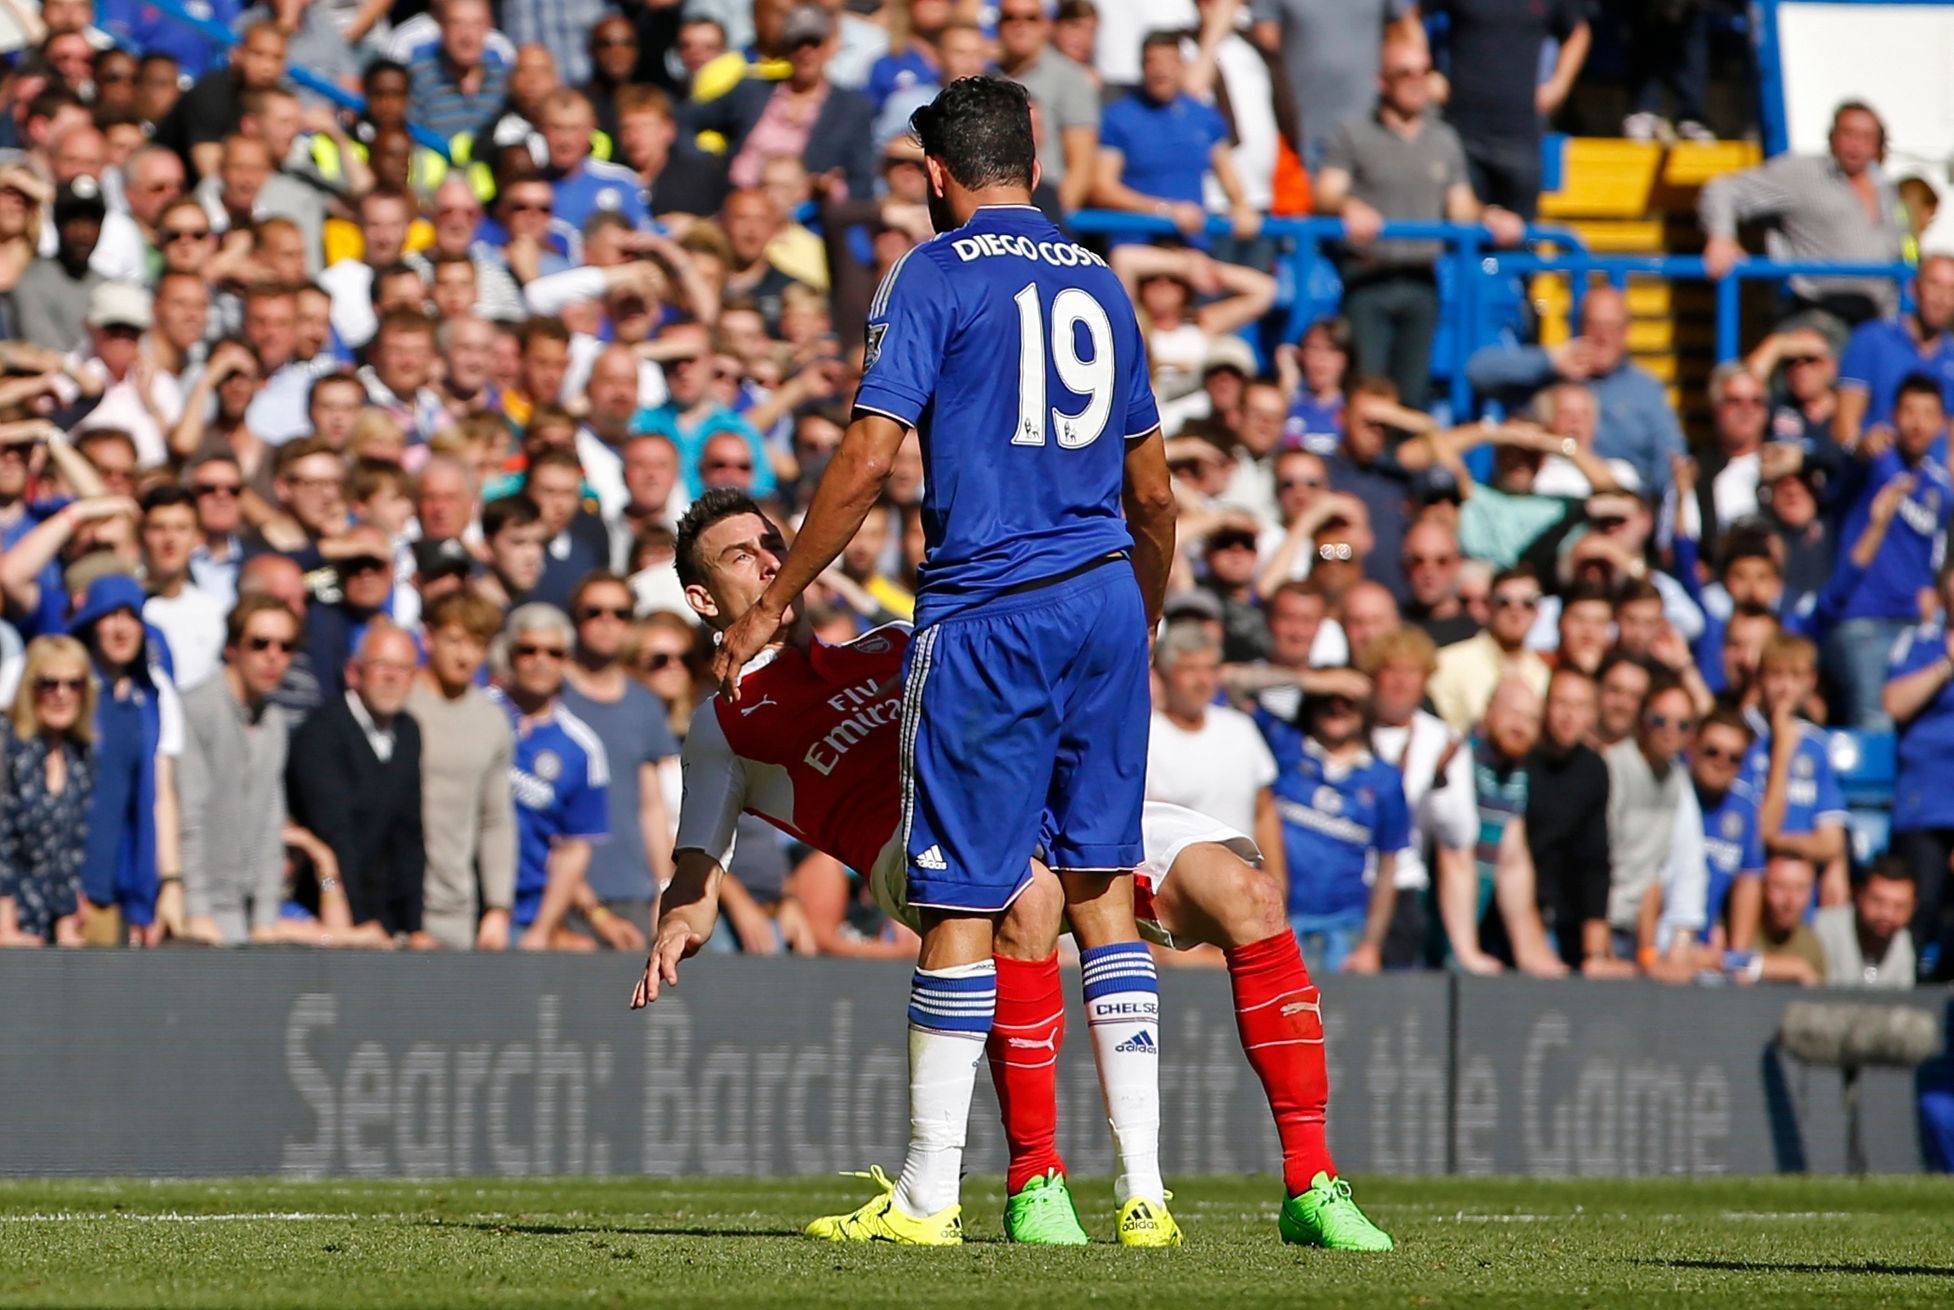 Chelsea's Diego Costa clashes with Arsenal's Laurent Koscielny